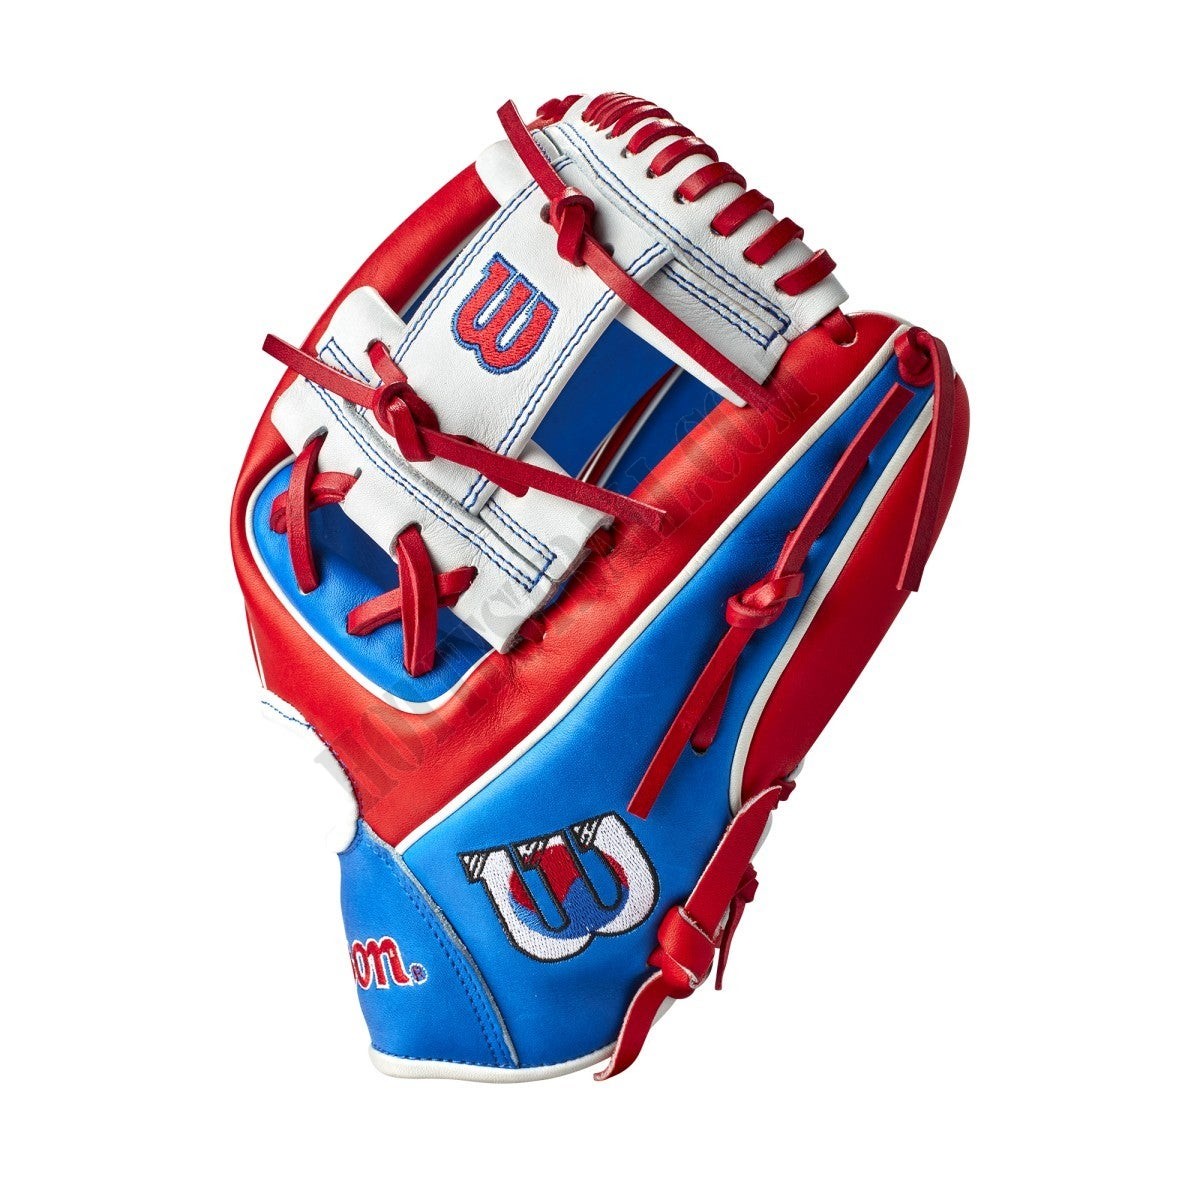 2021 A2000 1786 South Korea 11.5" Infield Baseball Glove - Limited Edition ● Wilson Promotions - -3